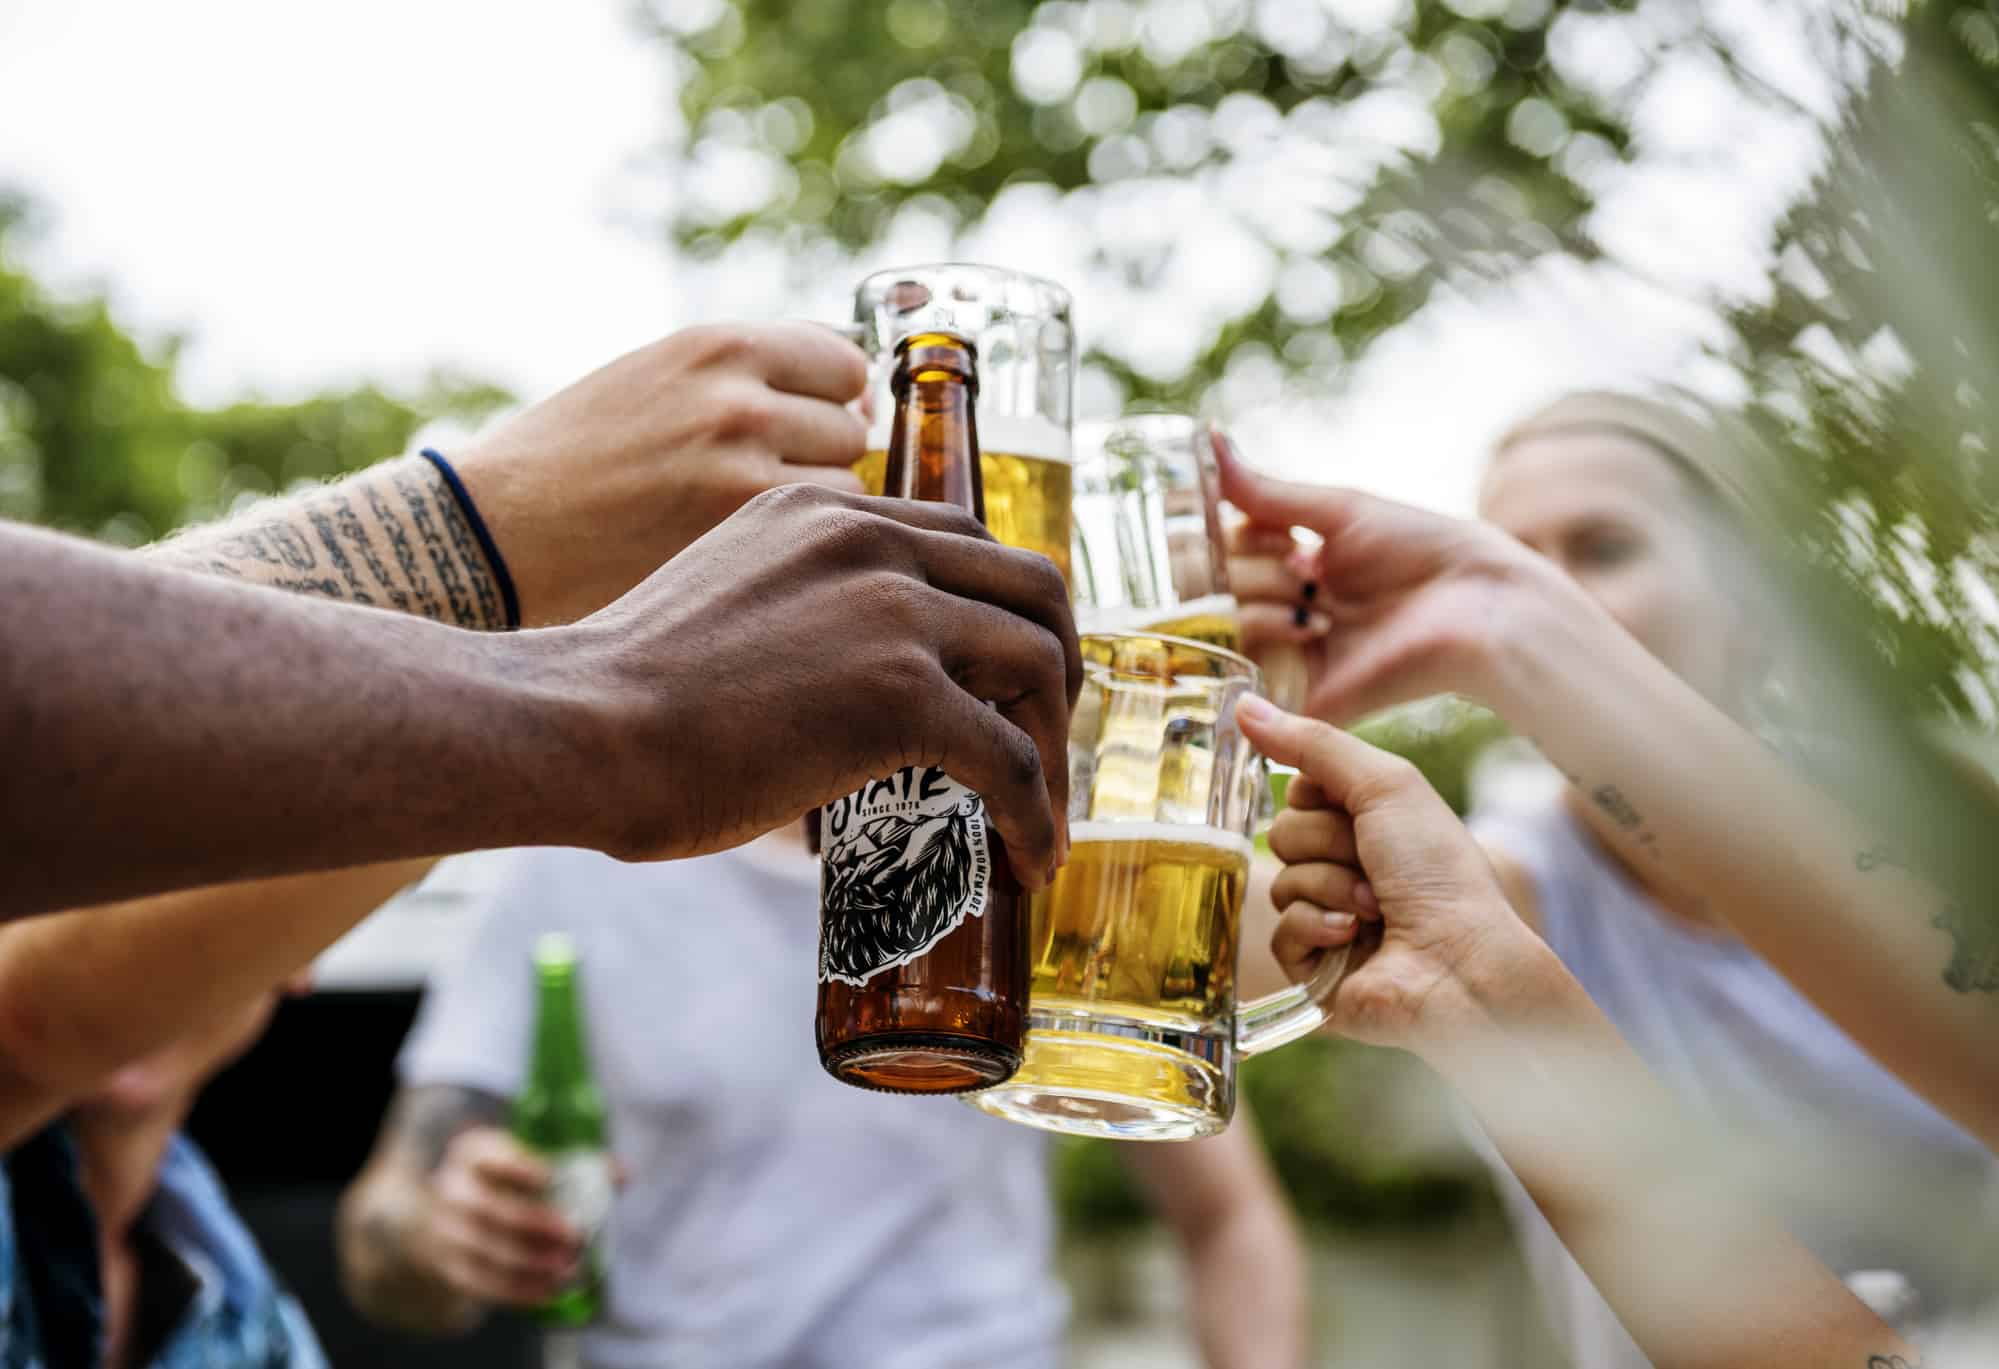 A group of people toasting beer bottles outdoors.